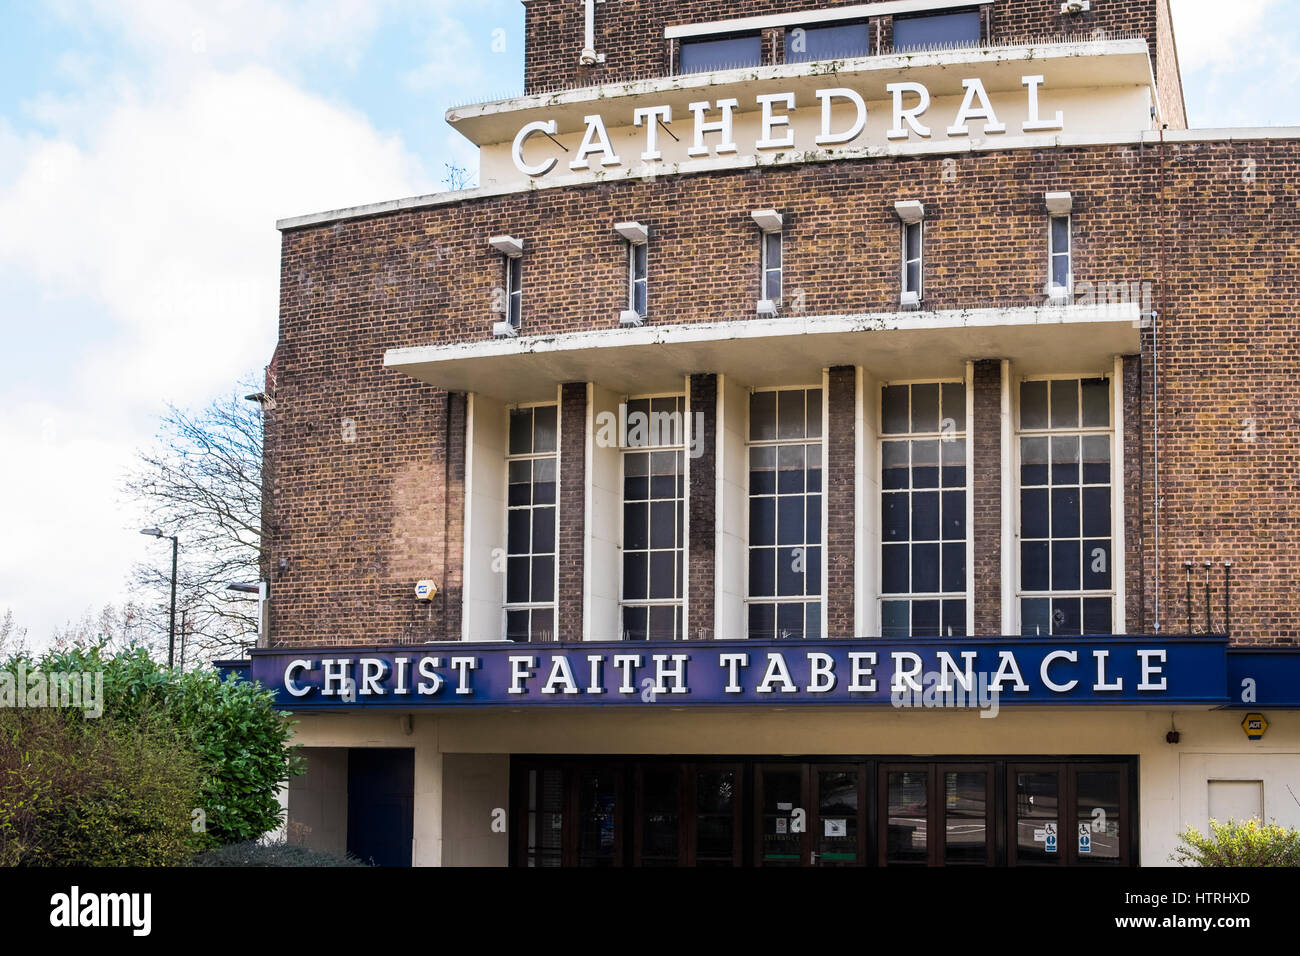 Christ Tabernacle Cathédrale, Woolwich, Londres, Angleterre, Royaume-Uni Banque D'Images